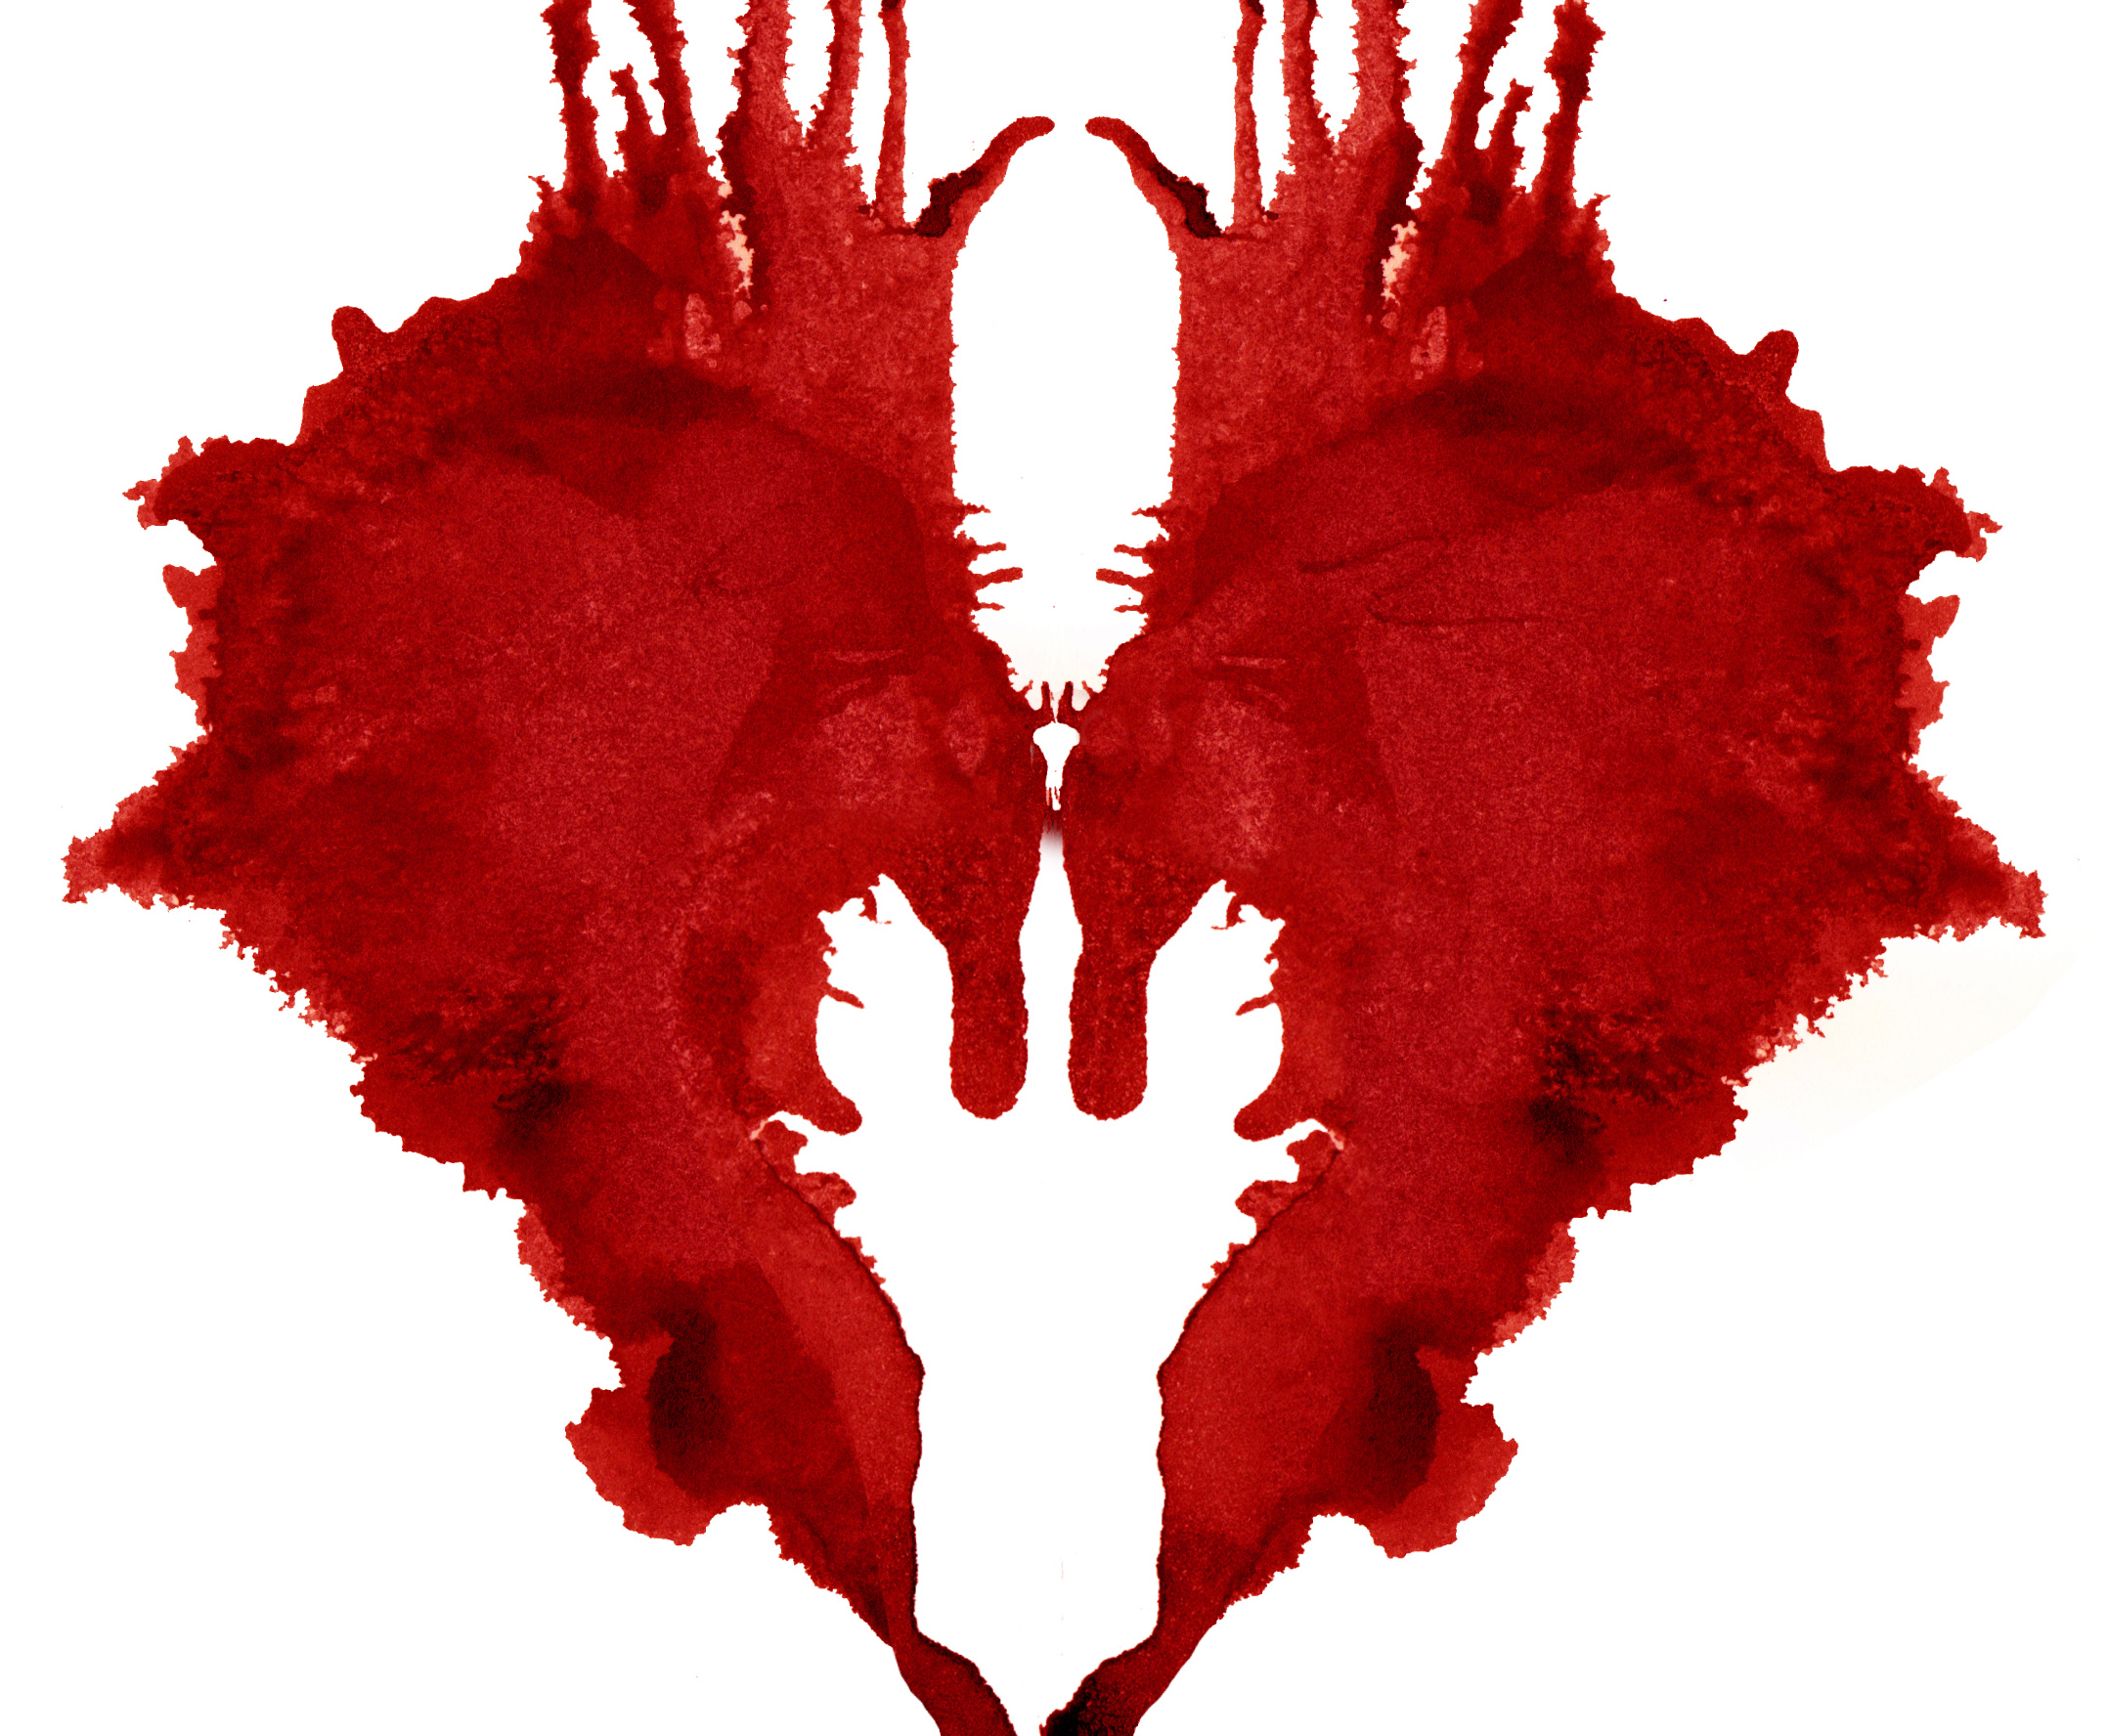 image from a poster of Romeo and Juliet of a bloody heart